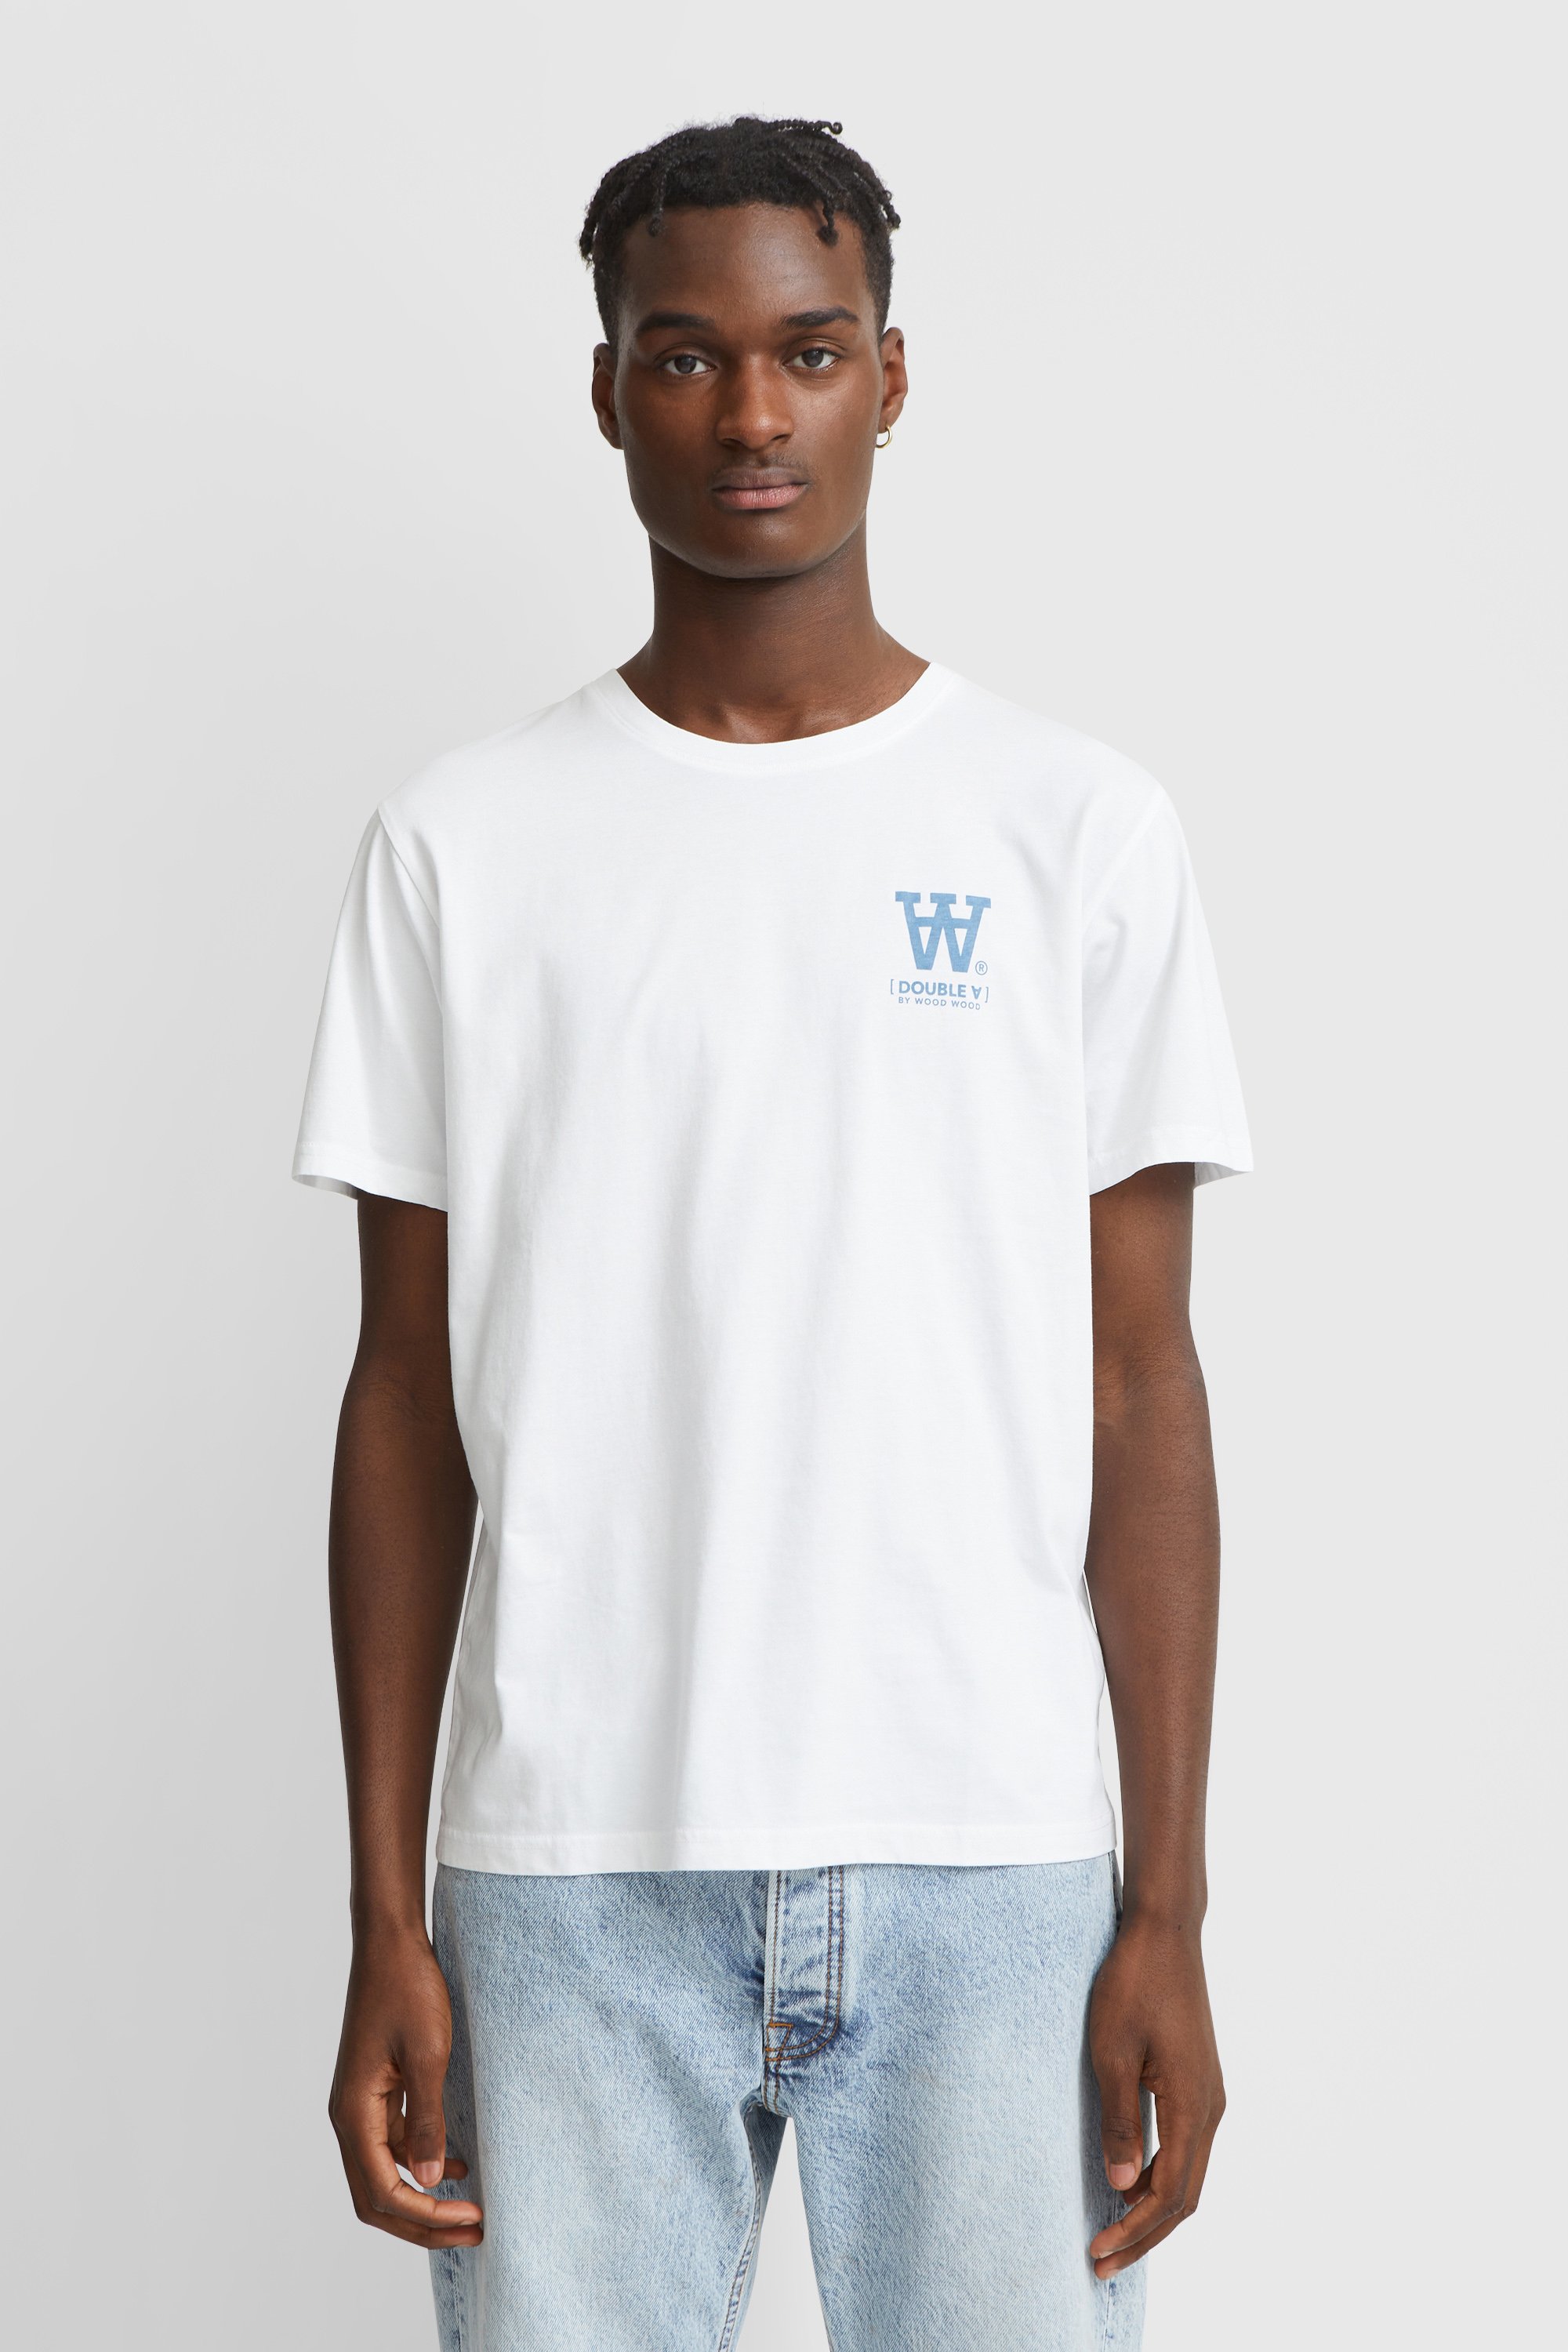 A by Wood Ace T-shirt White/blue print | WoodWood.com